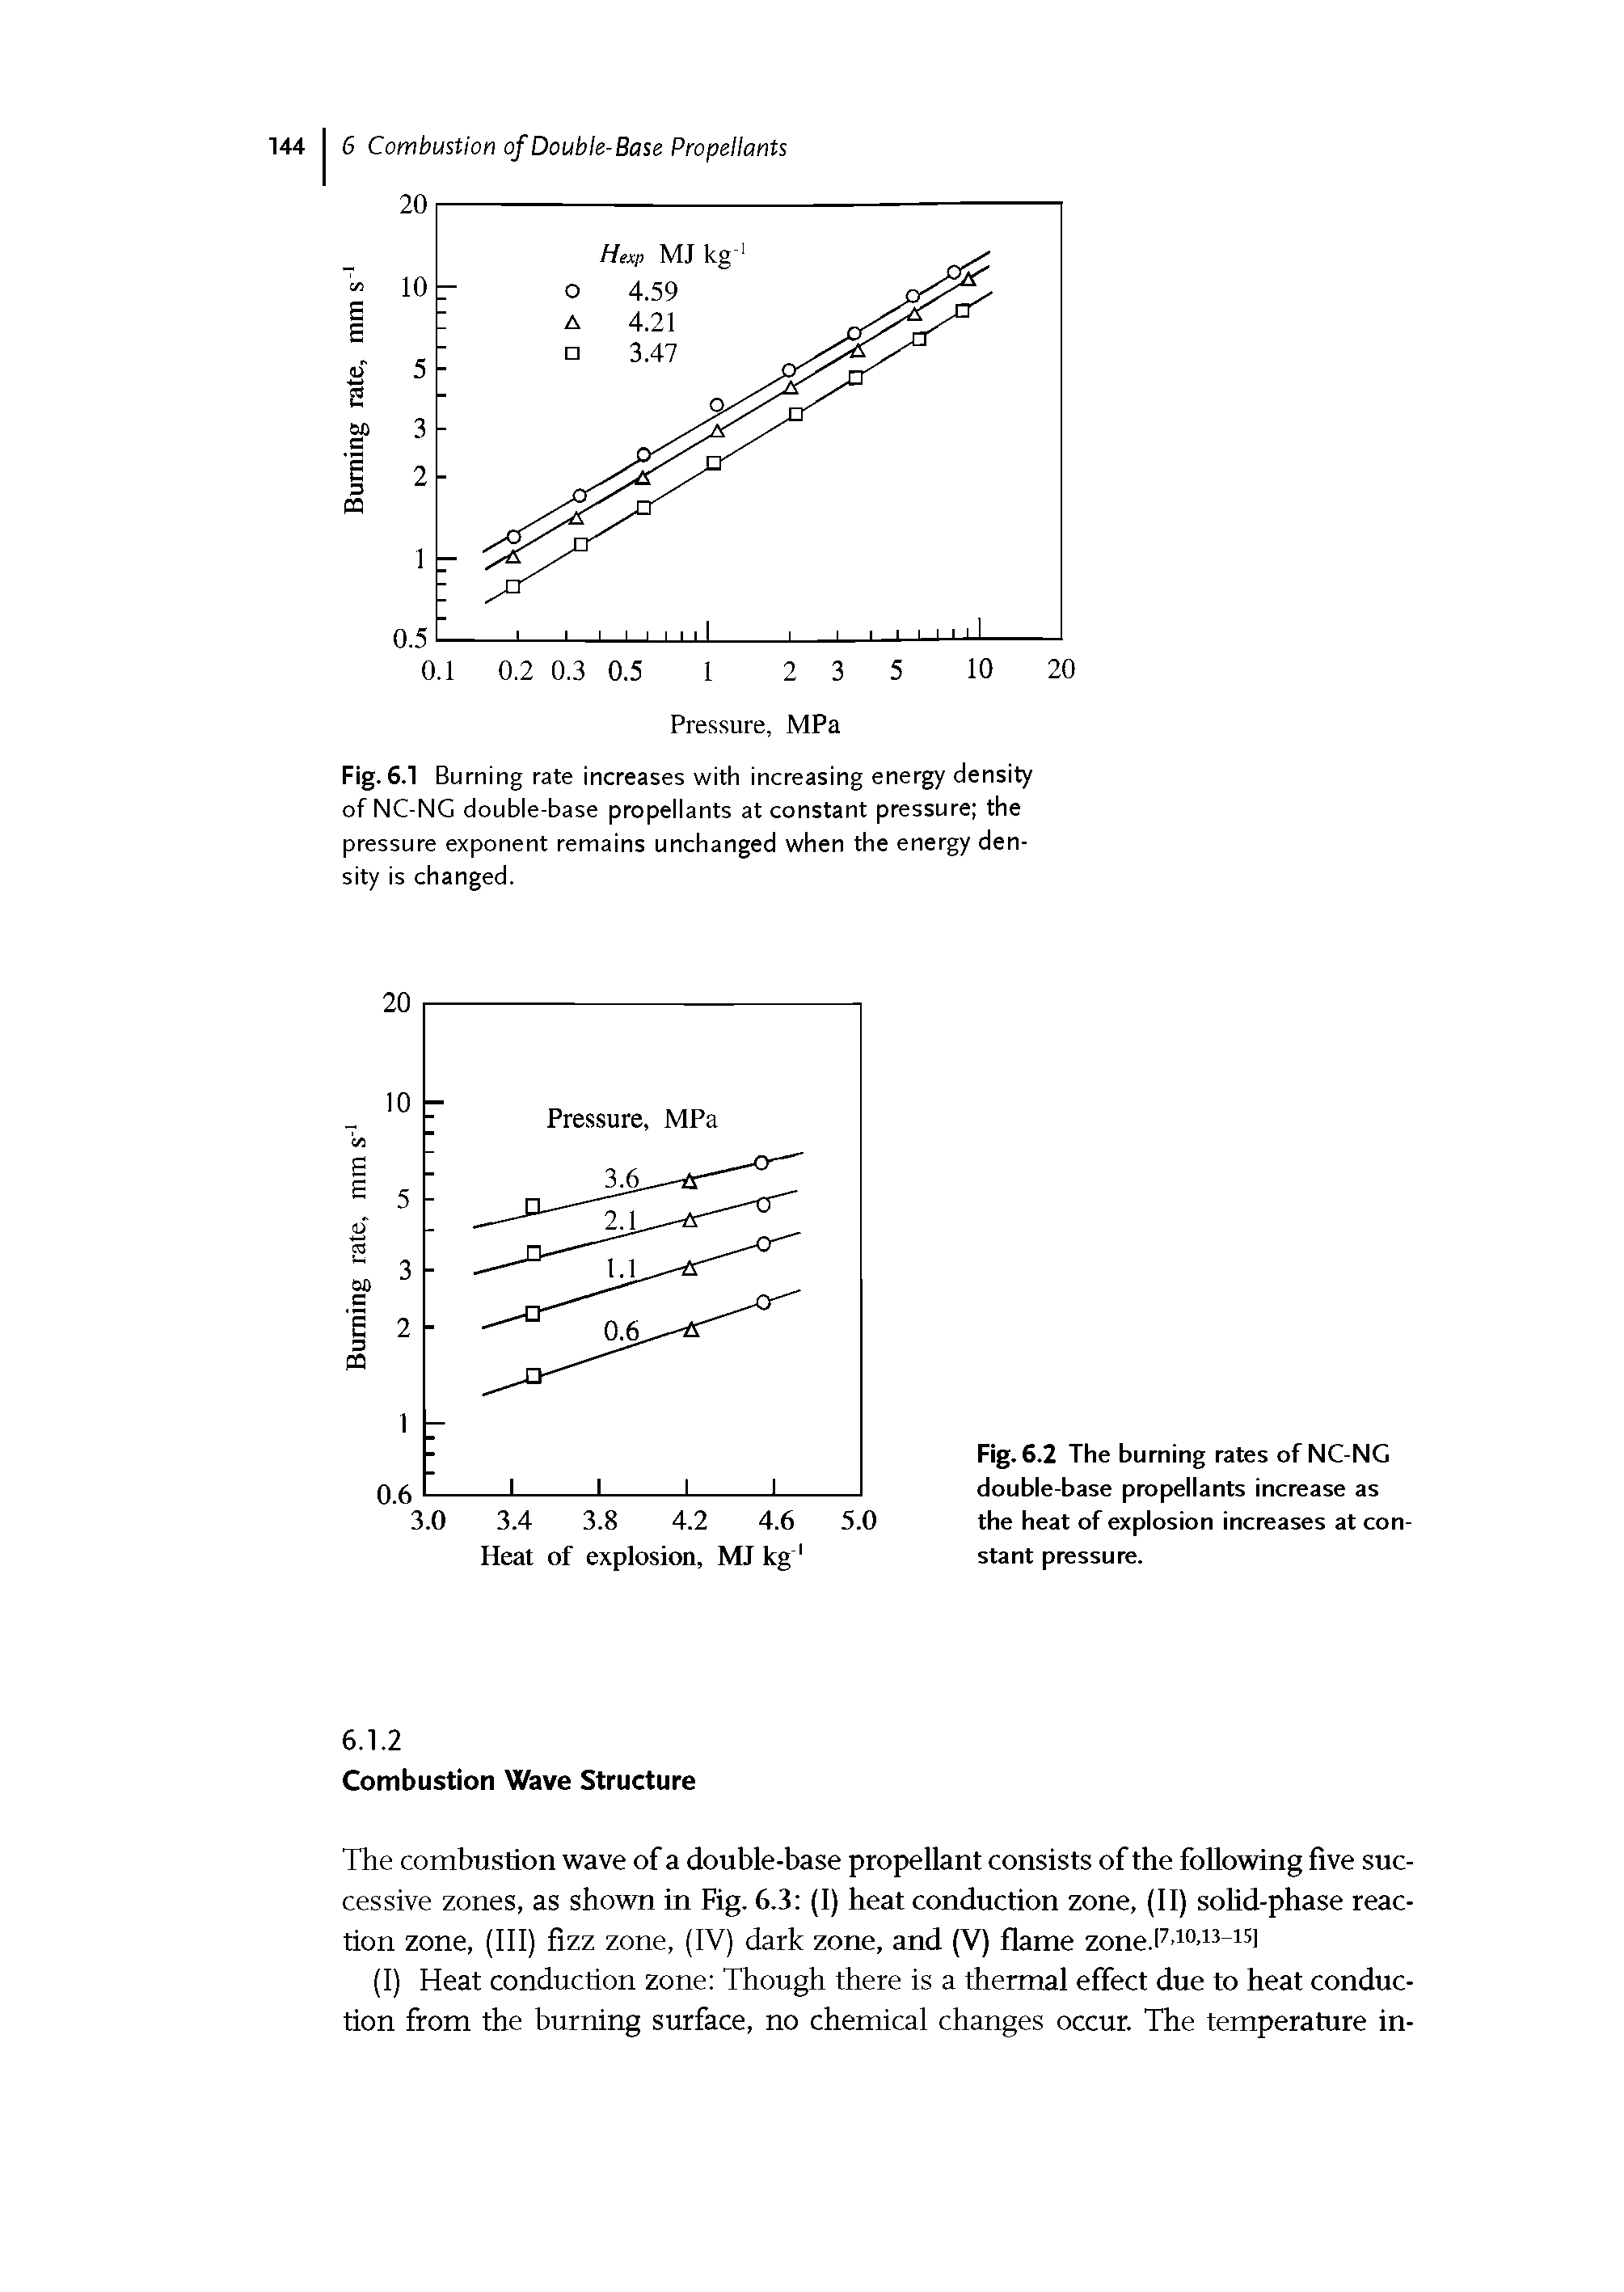 Fig. 6.1 Burning rate increases with increasing energy density of NC-NG double-base propellants at constant pressure the pressure exponent remains unchanged when the energy density is changed.